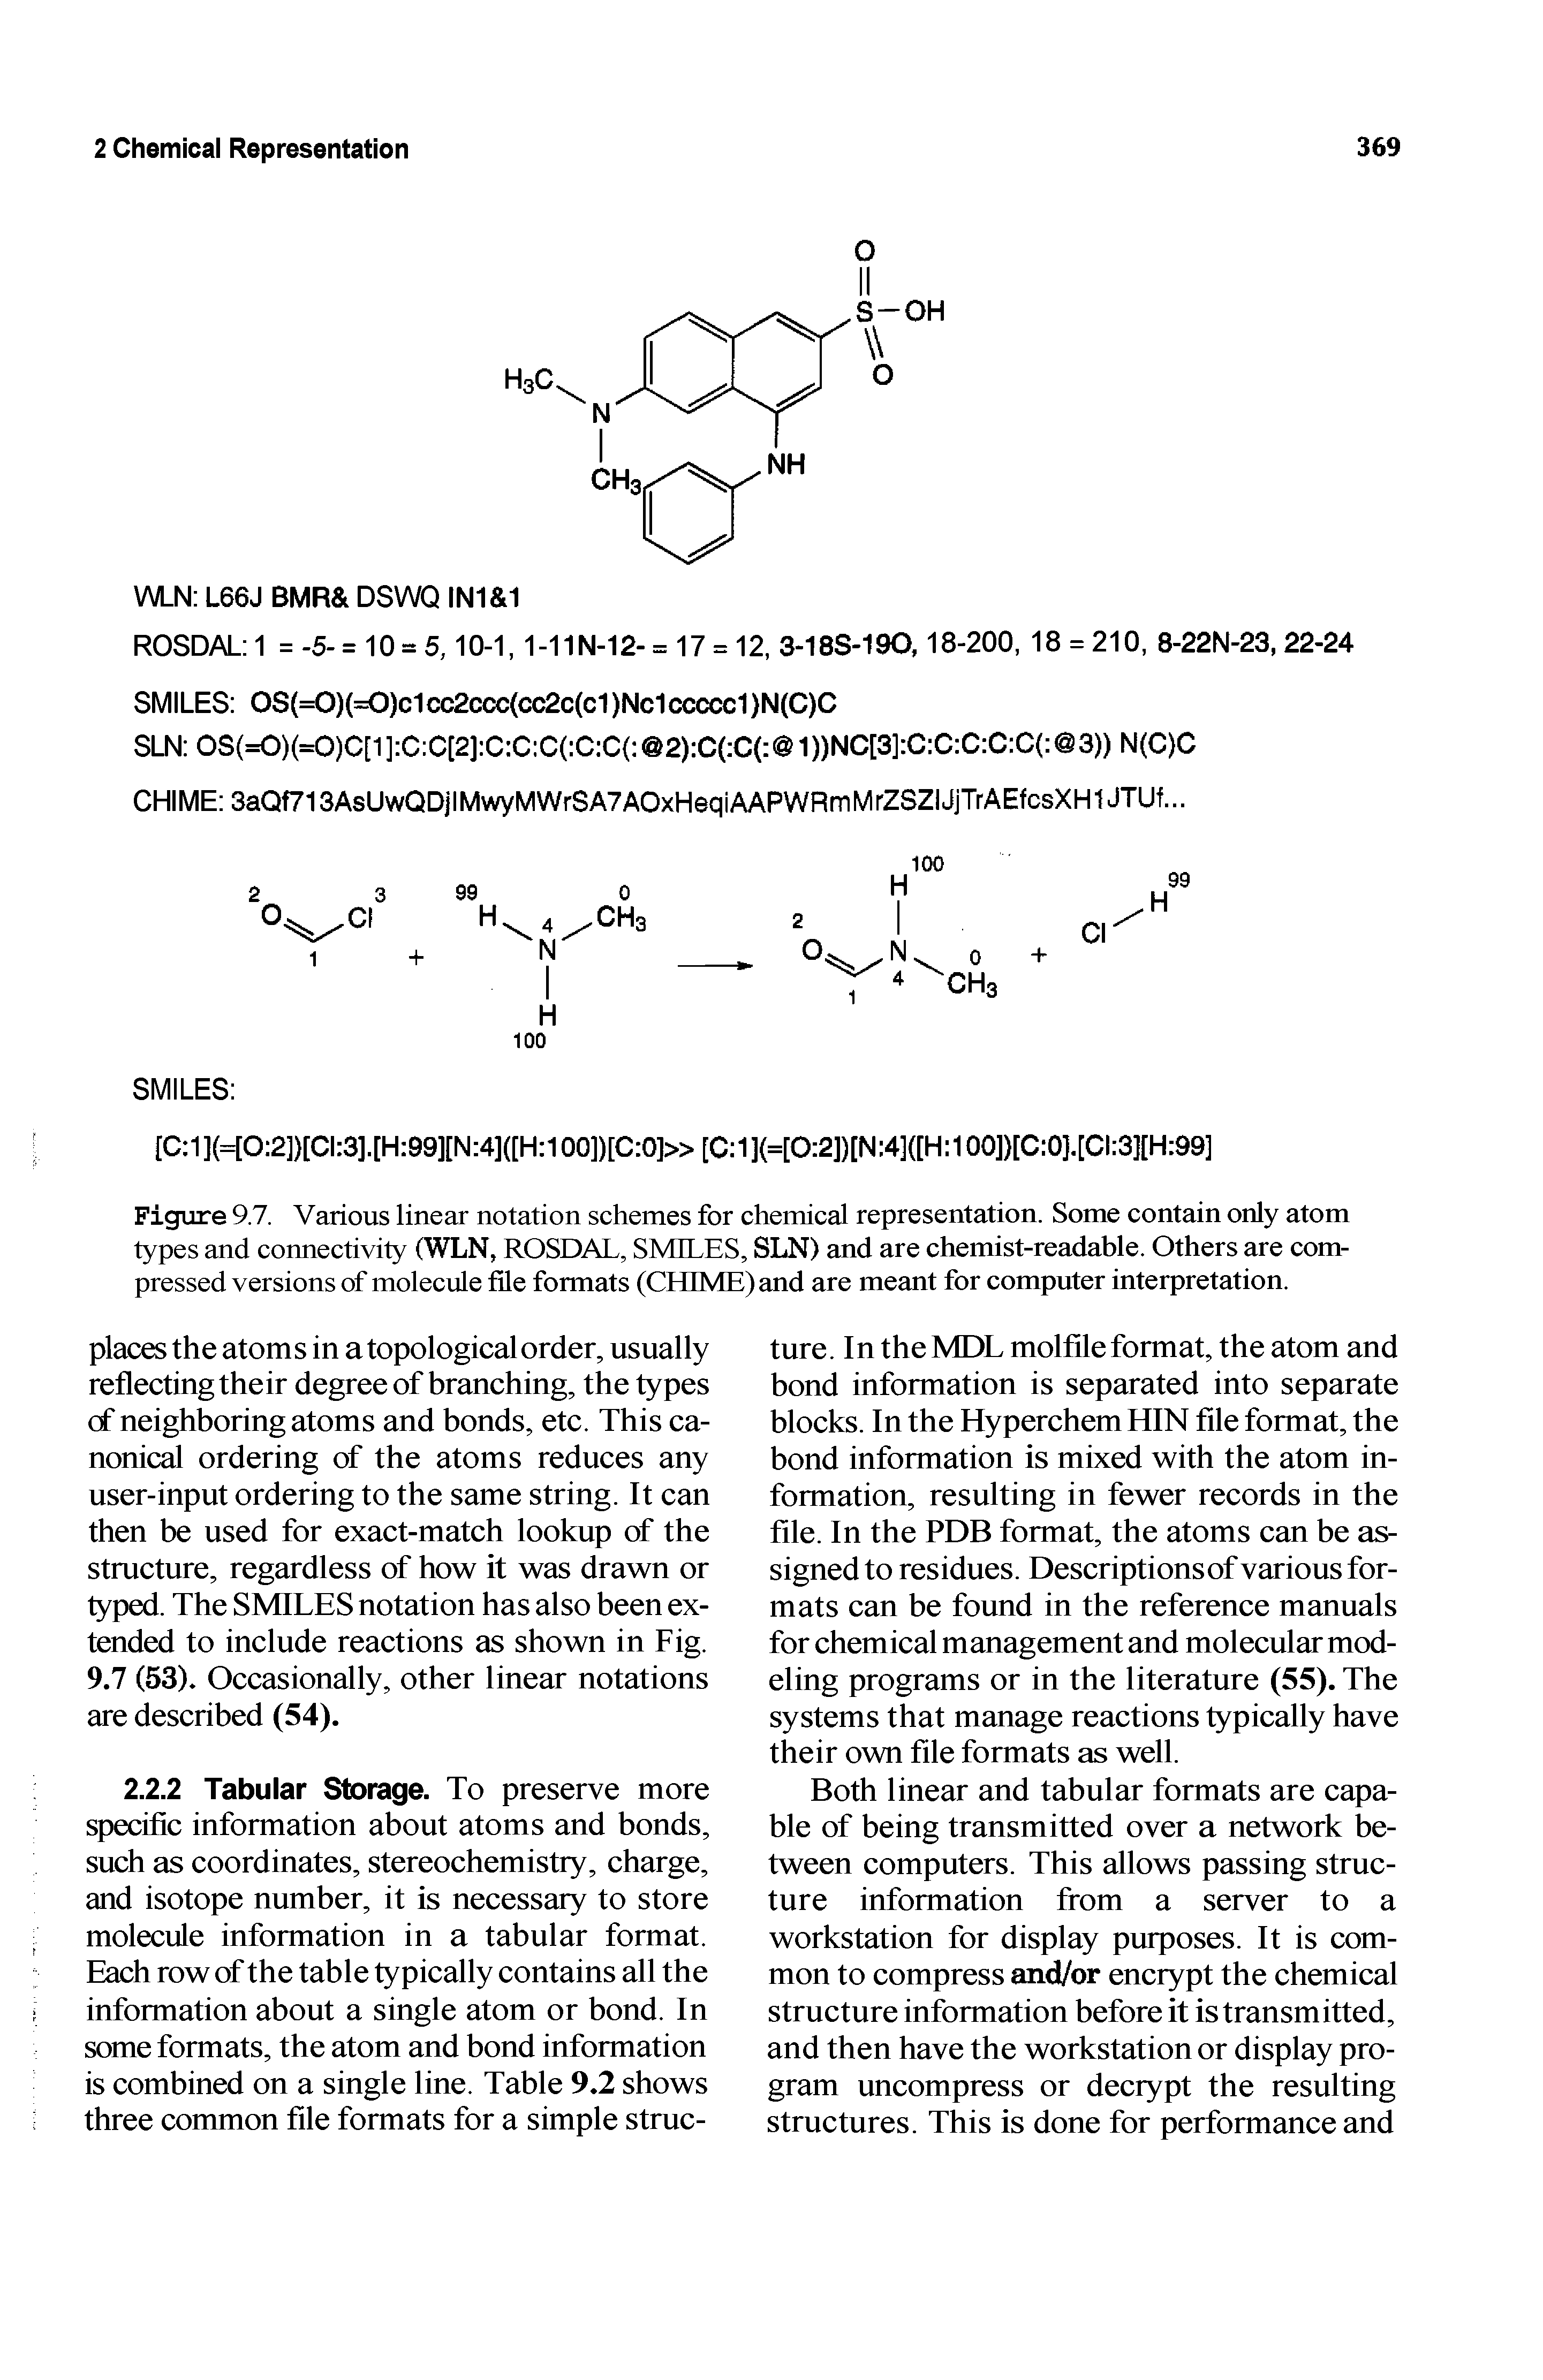 Figure 9.7. Various linear notation schemes for chemical representation. Some contain only atom types and connectivity (WLN, ROSDAL, SMILES, SLN) and are chemist-readable. Others are compressed versions of molecule file formats (CHIME) and are meant for computer interpretation.